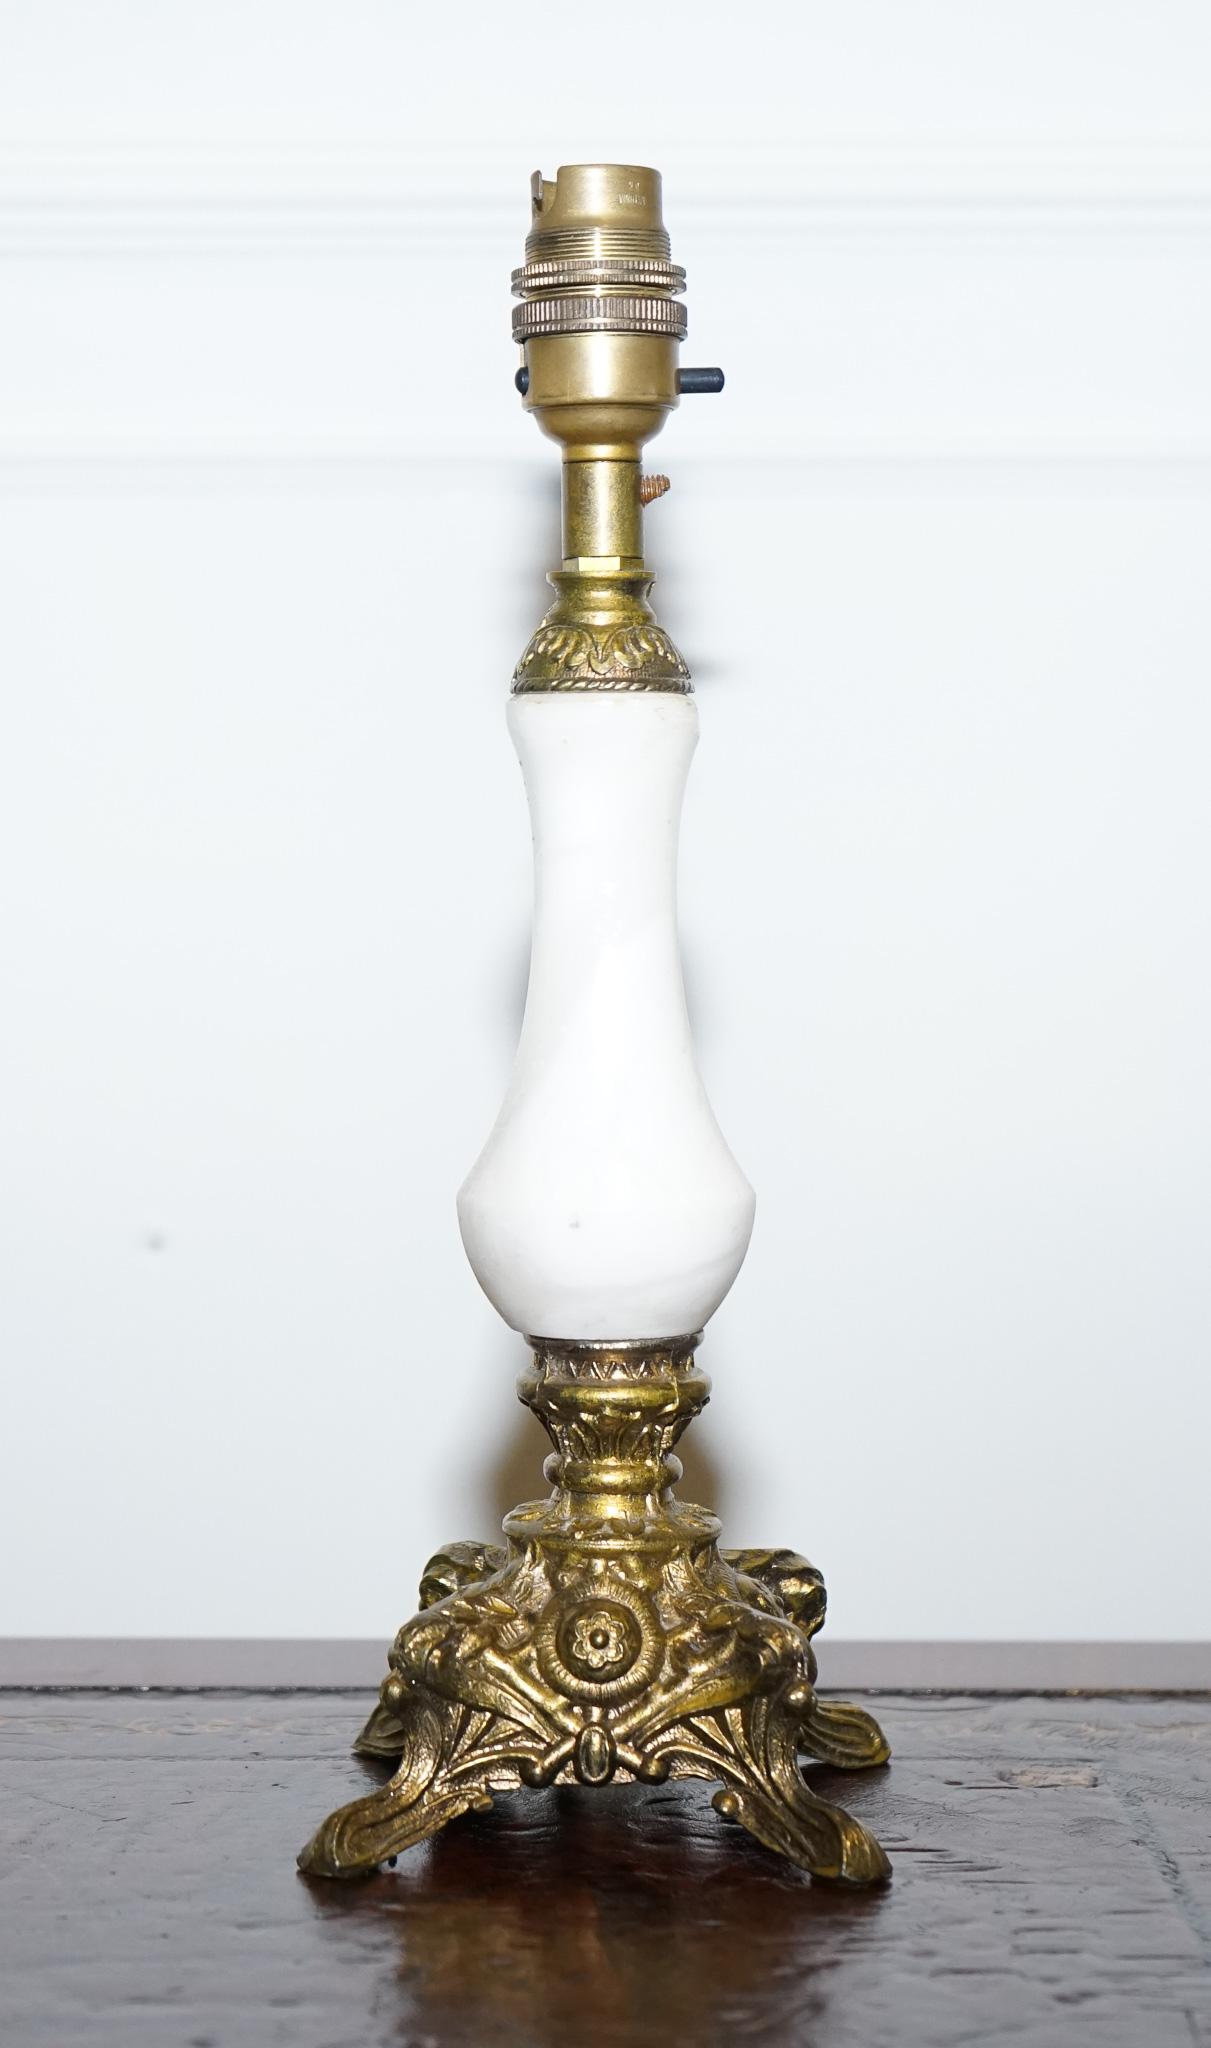 LOVELY PAiR OF GOLD AND ONYX SMALL TABLE LAMPS In Good Condition For Sale In Pulborough, GB